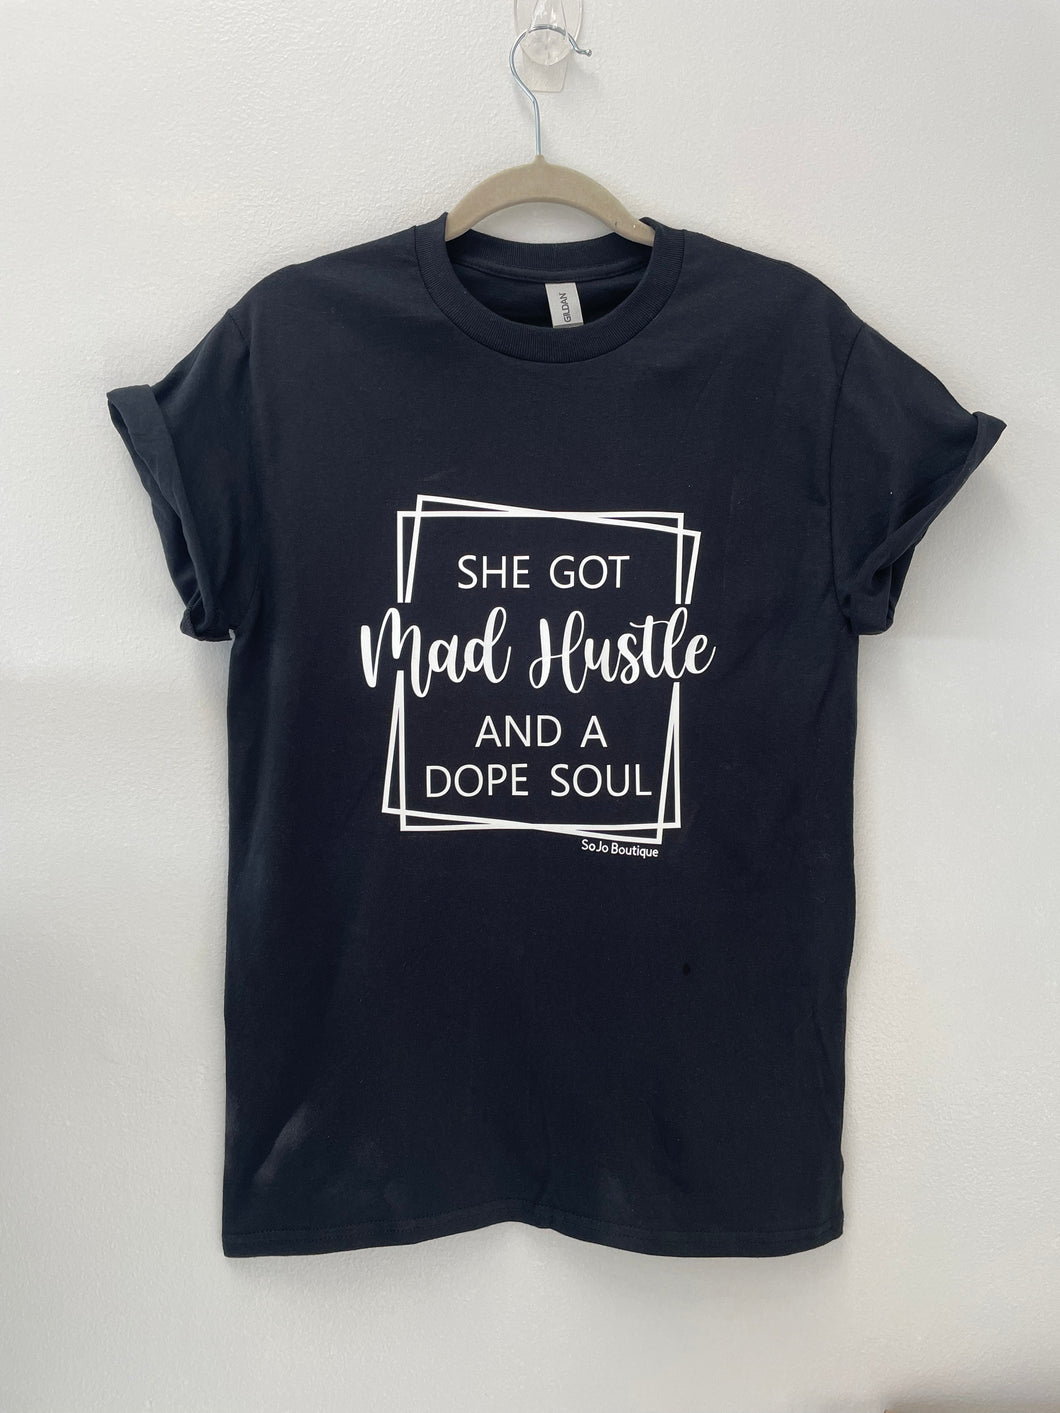 Cotton women's tee with inspiration